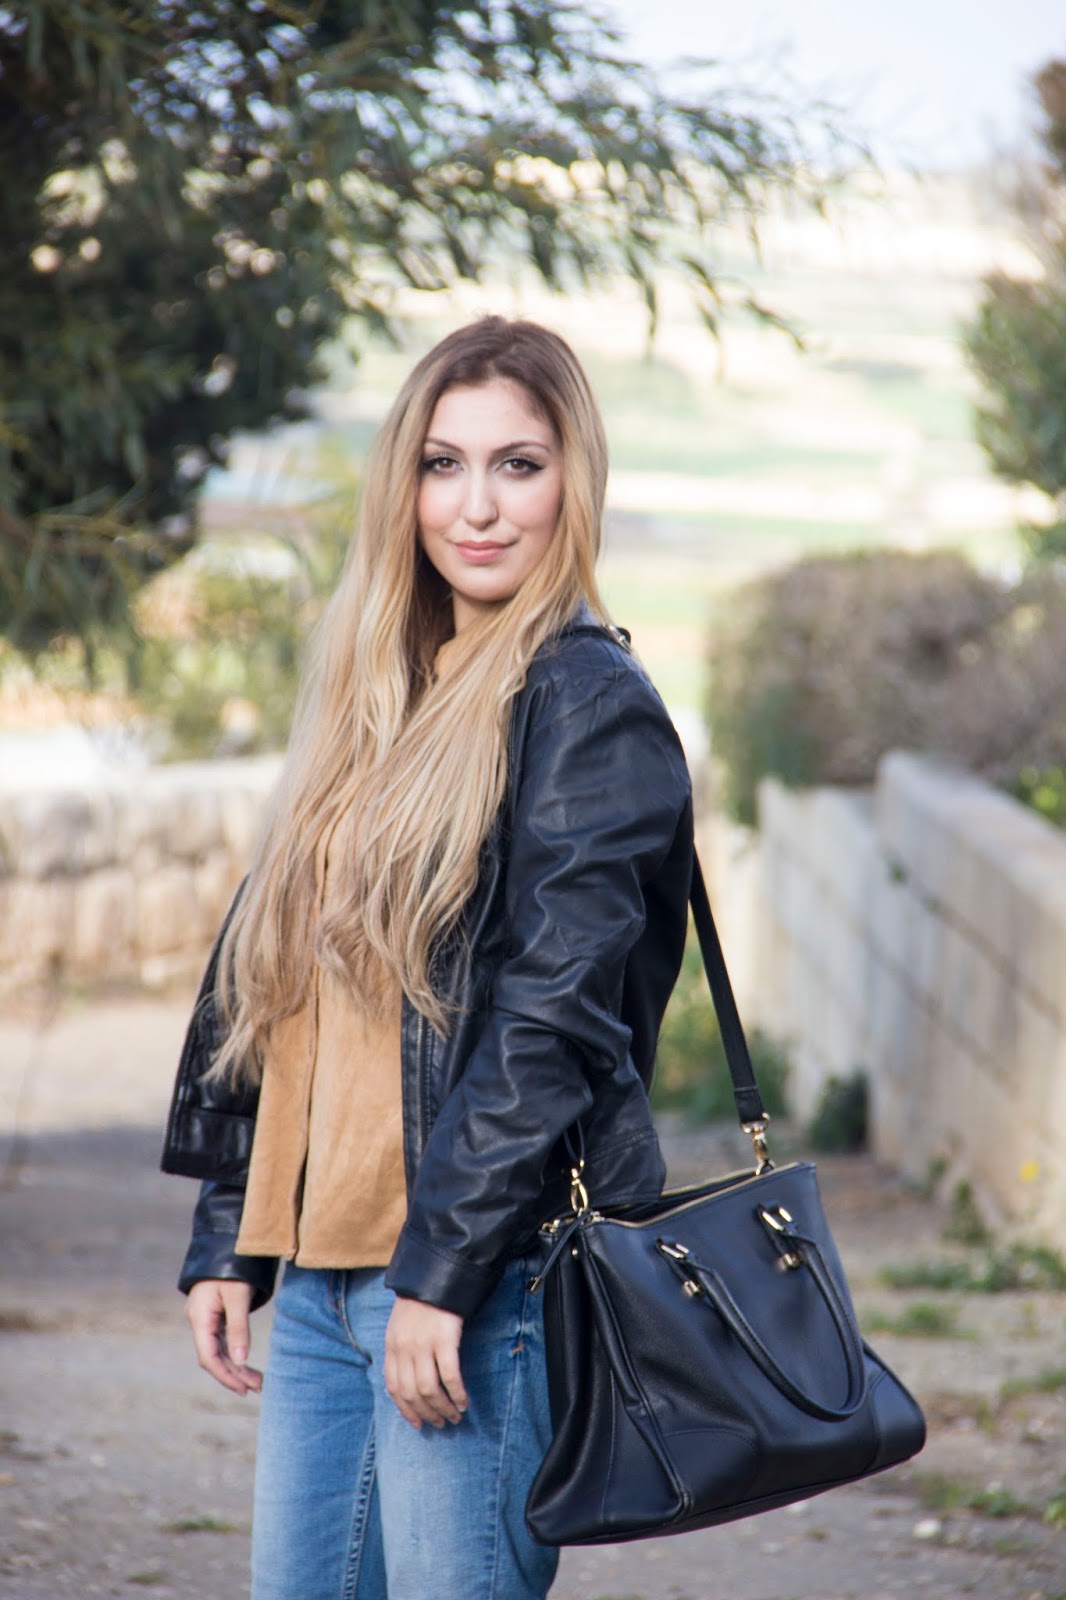 OOTD: Suede & Leather | A Blonde on the Go